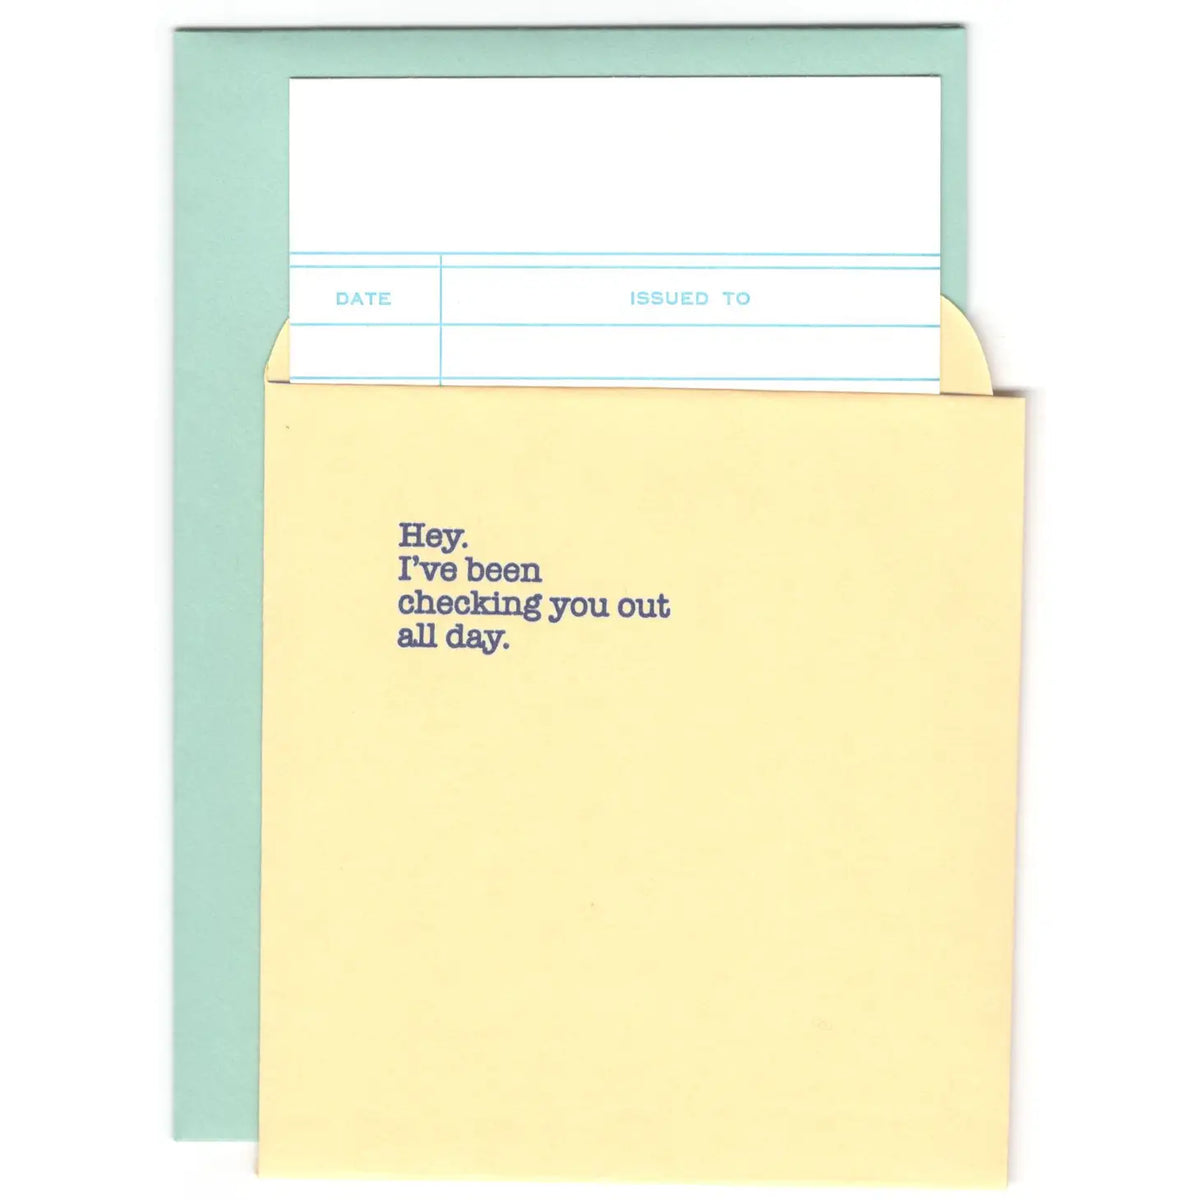 Checking You Out - Library Greeting Card - Power and Light Press